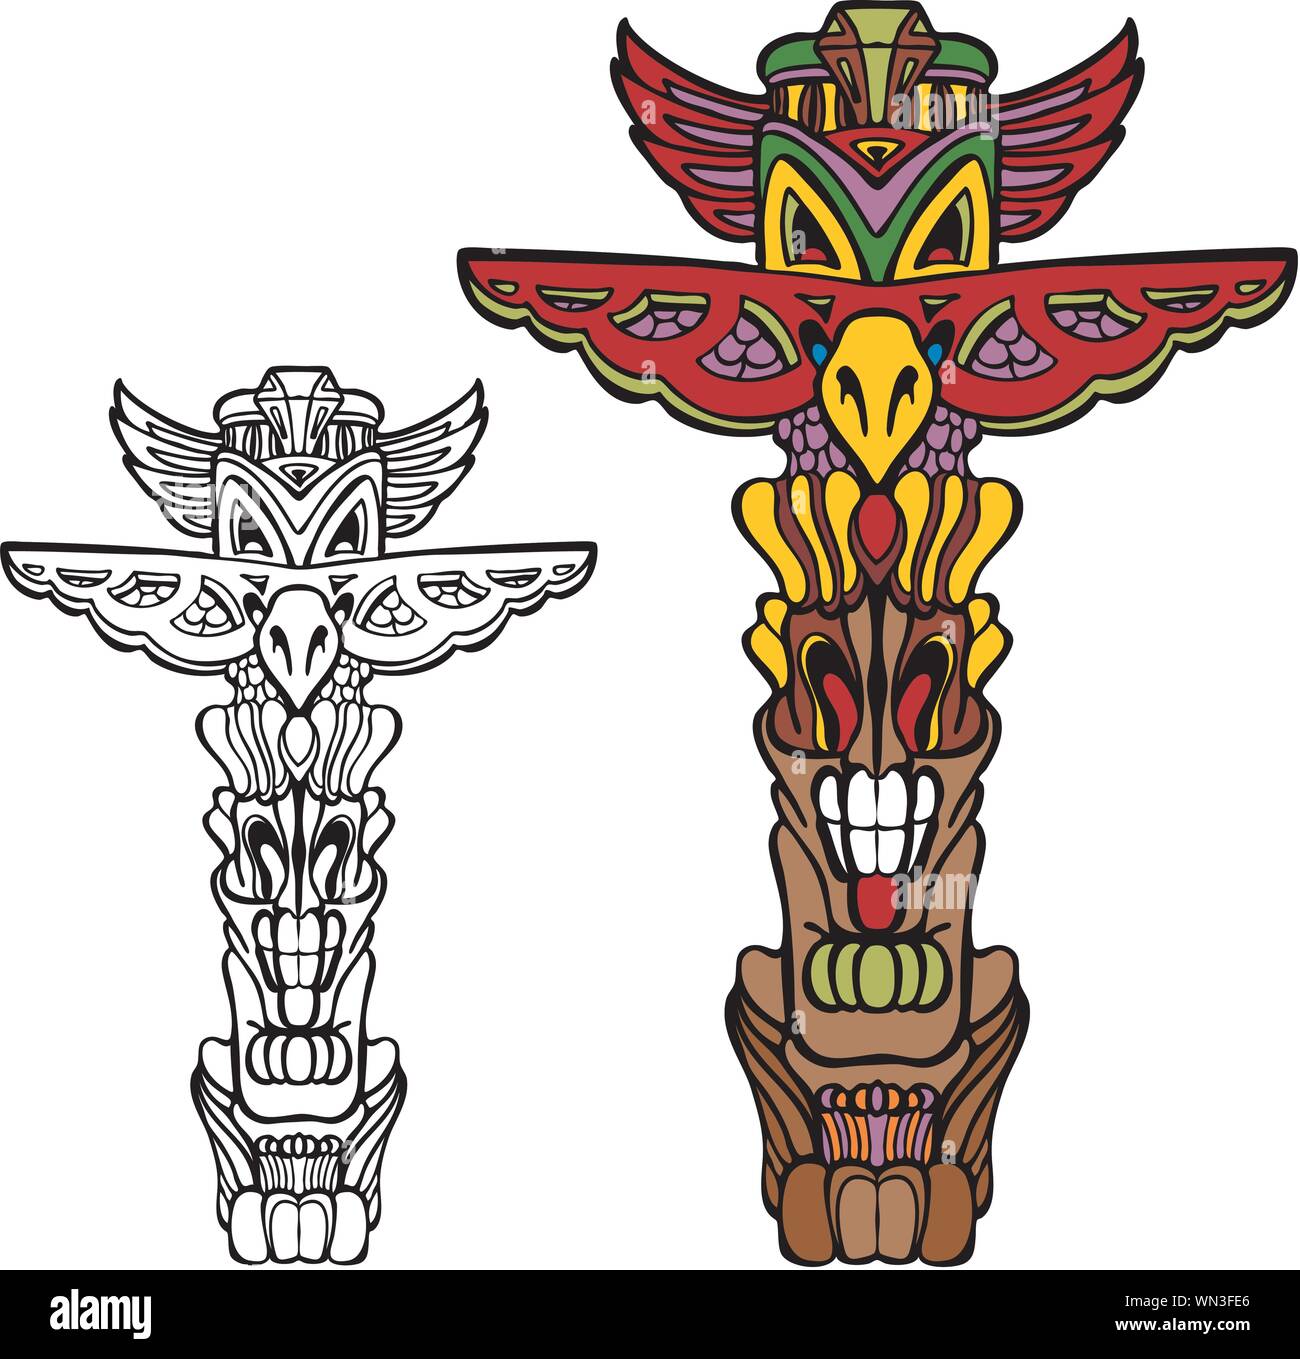 Culture totem pole detail Cut Out Stock Images & Pictures - Alamy